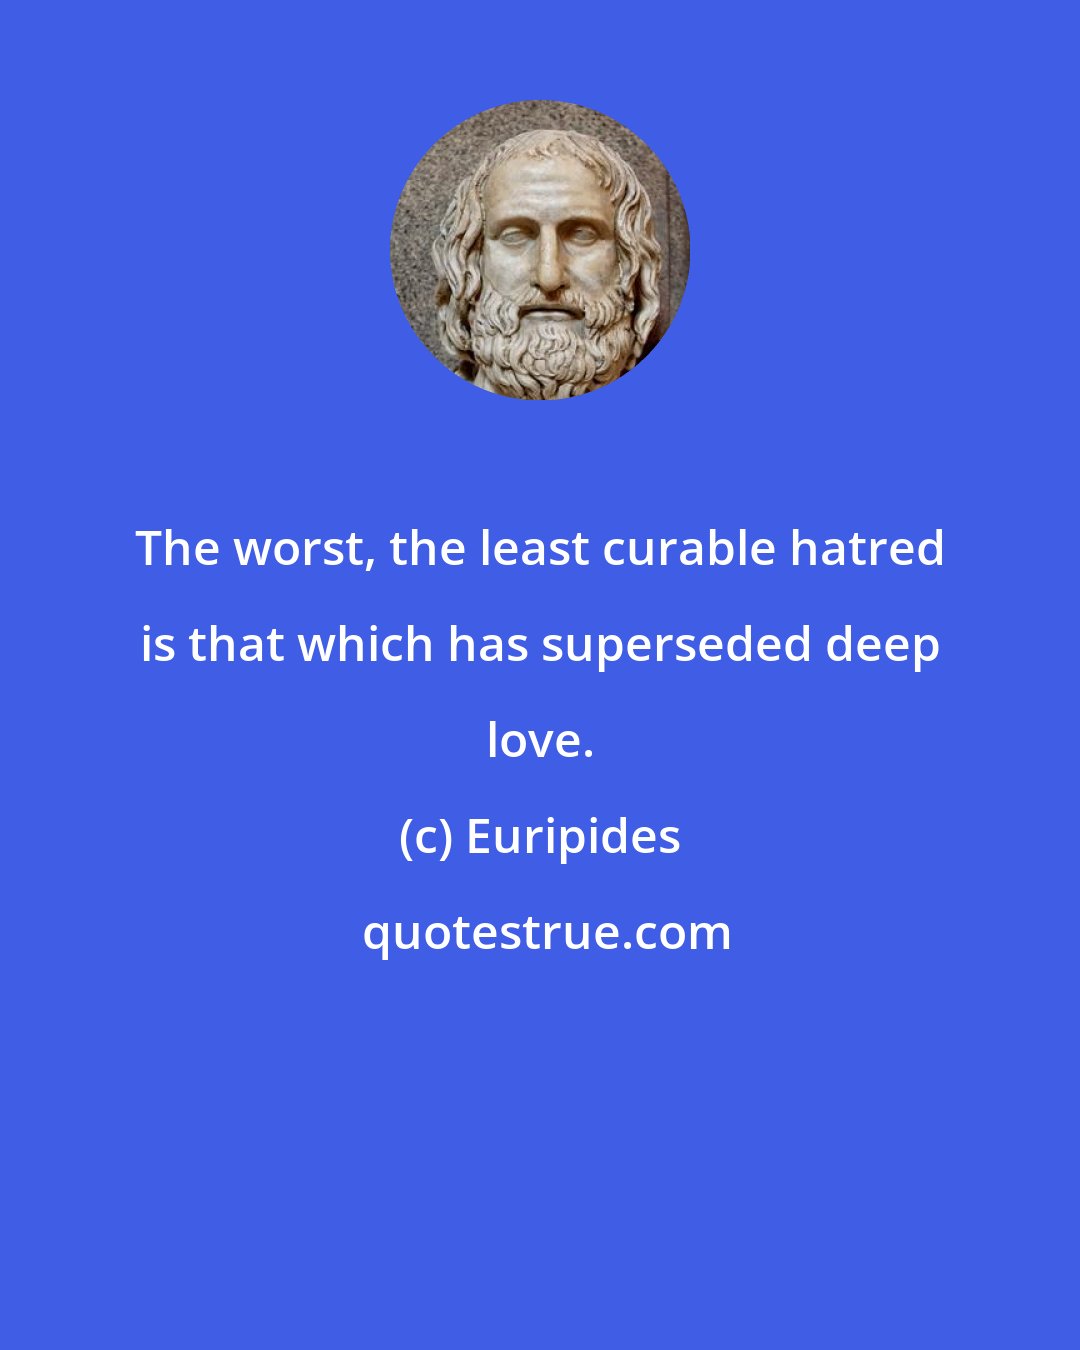 Euripides: The worst, the least curable hatred is that which has superseded deep love.